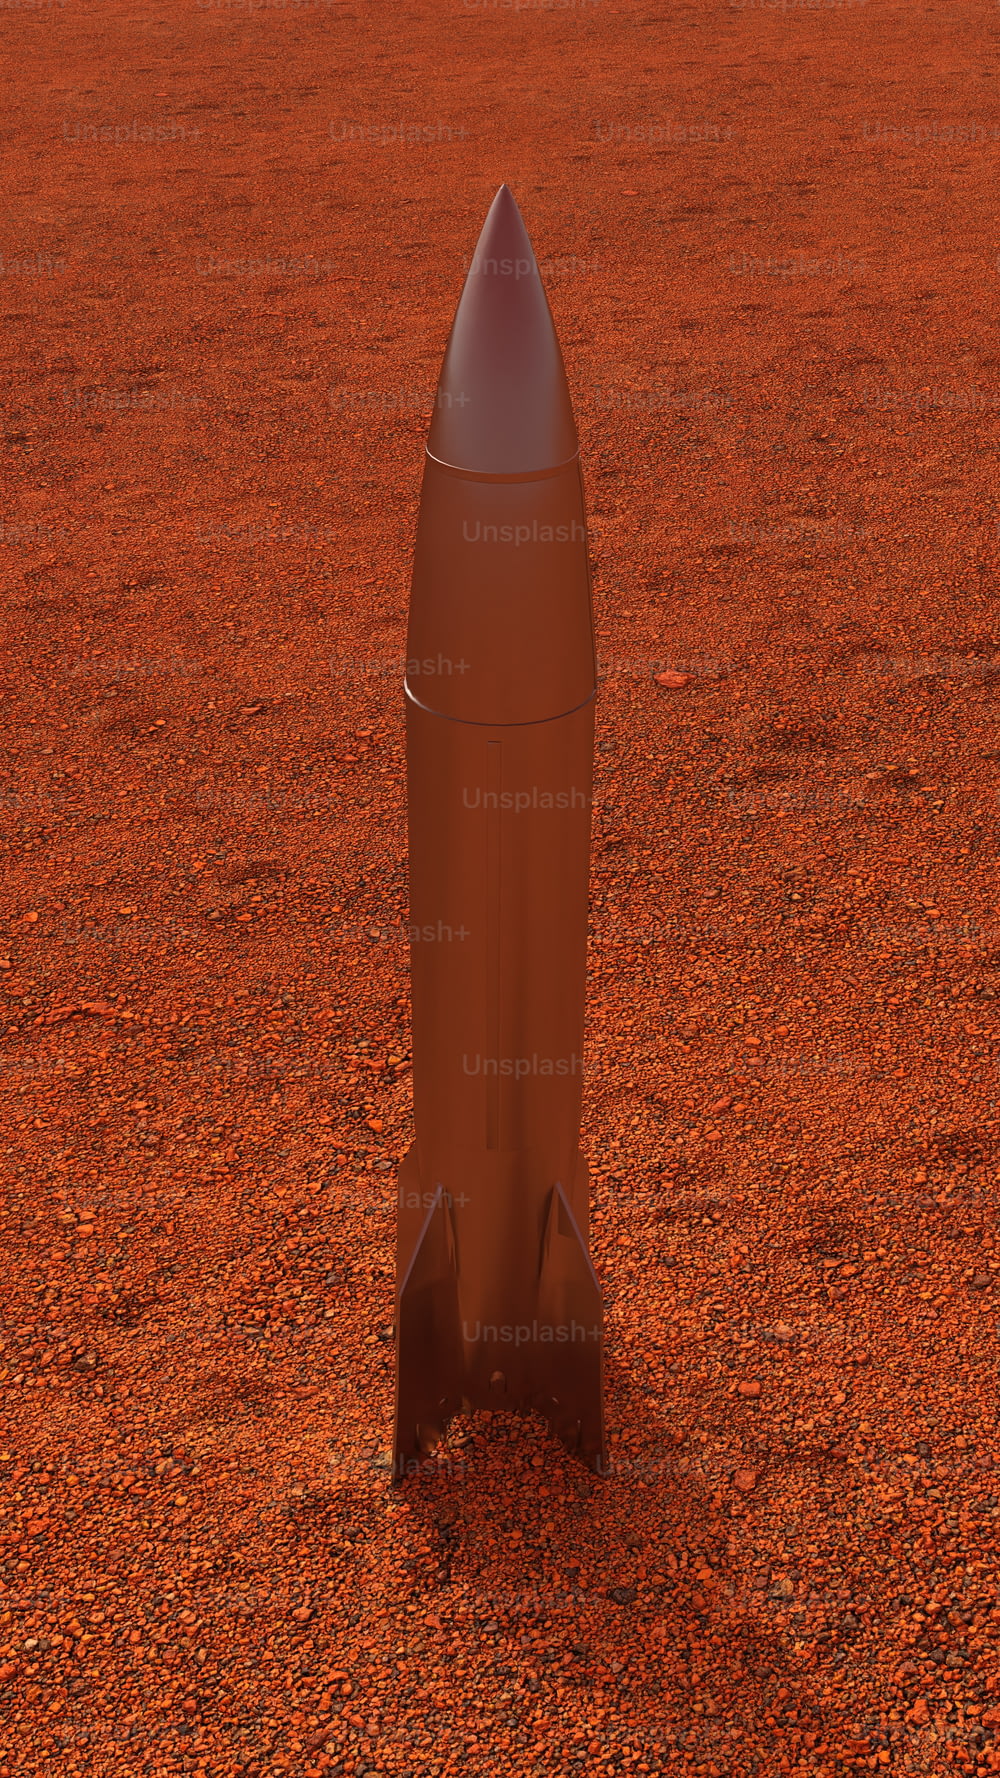 a small rocket sitting on top of a dirt field